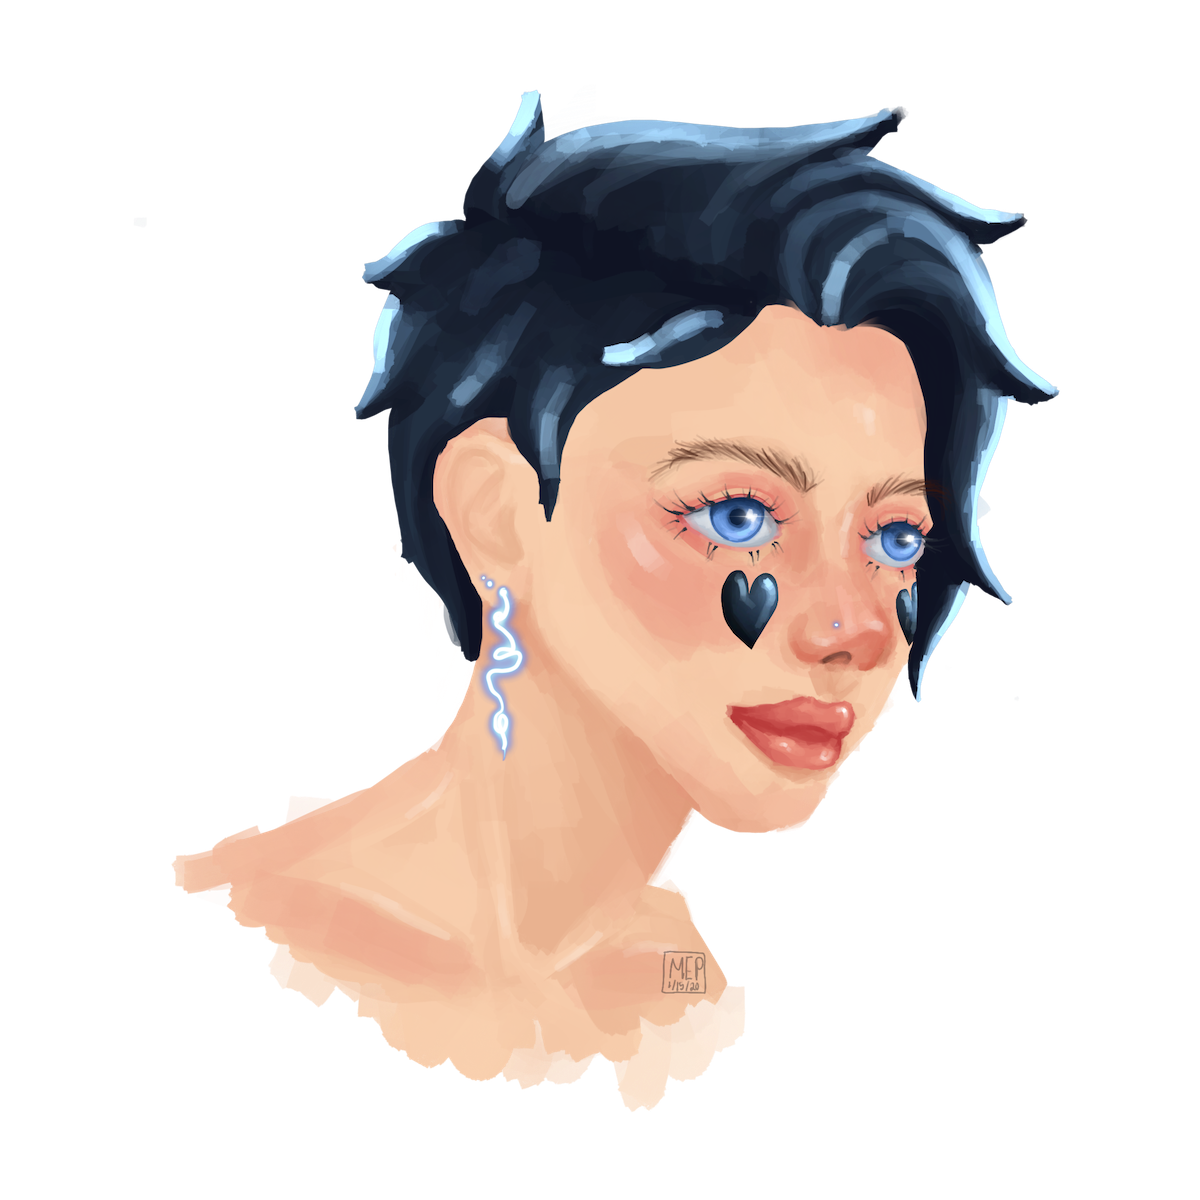 a digital portrait painting of a woman with short blue hair, icey blue eyes, and a dark blue heart on each cheek